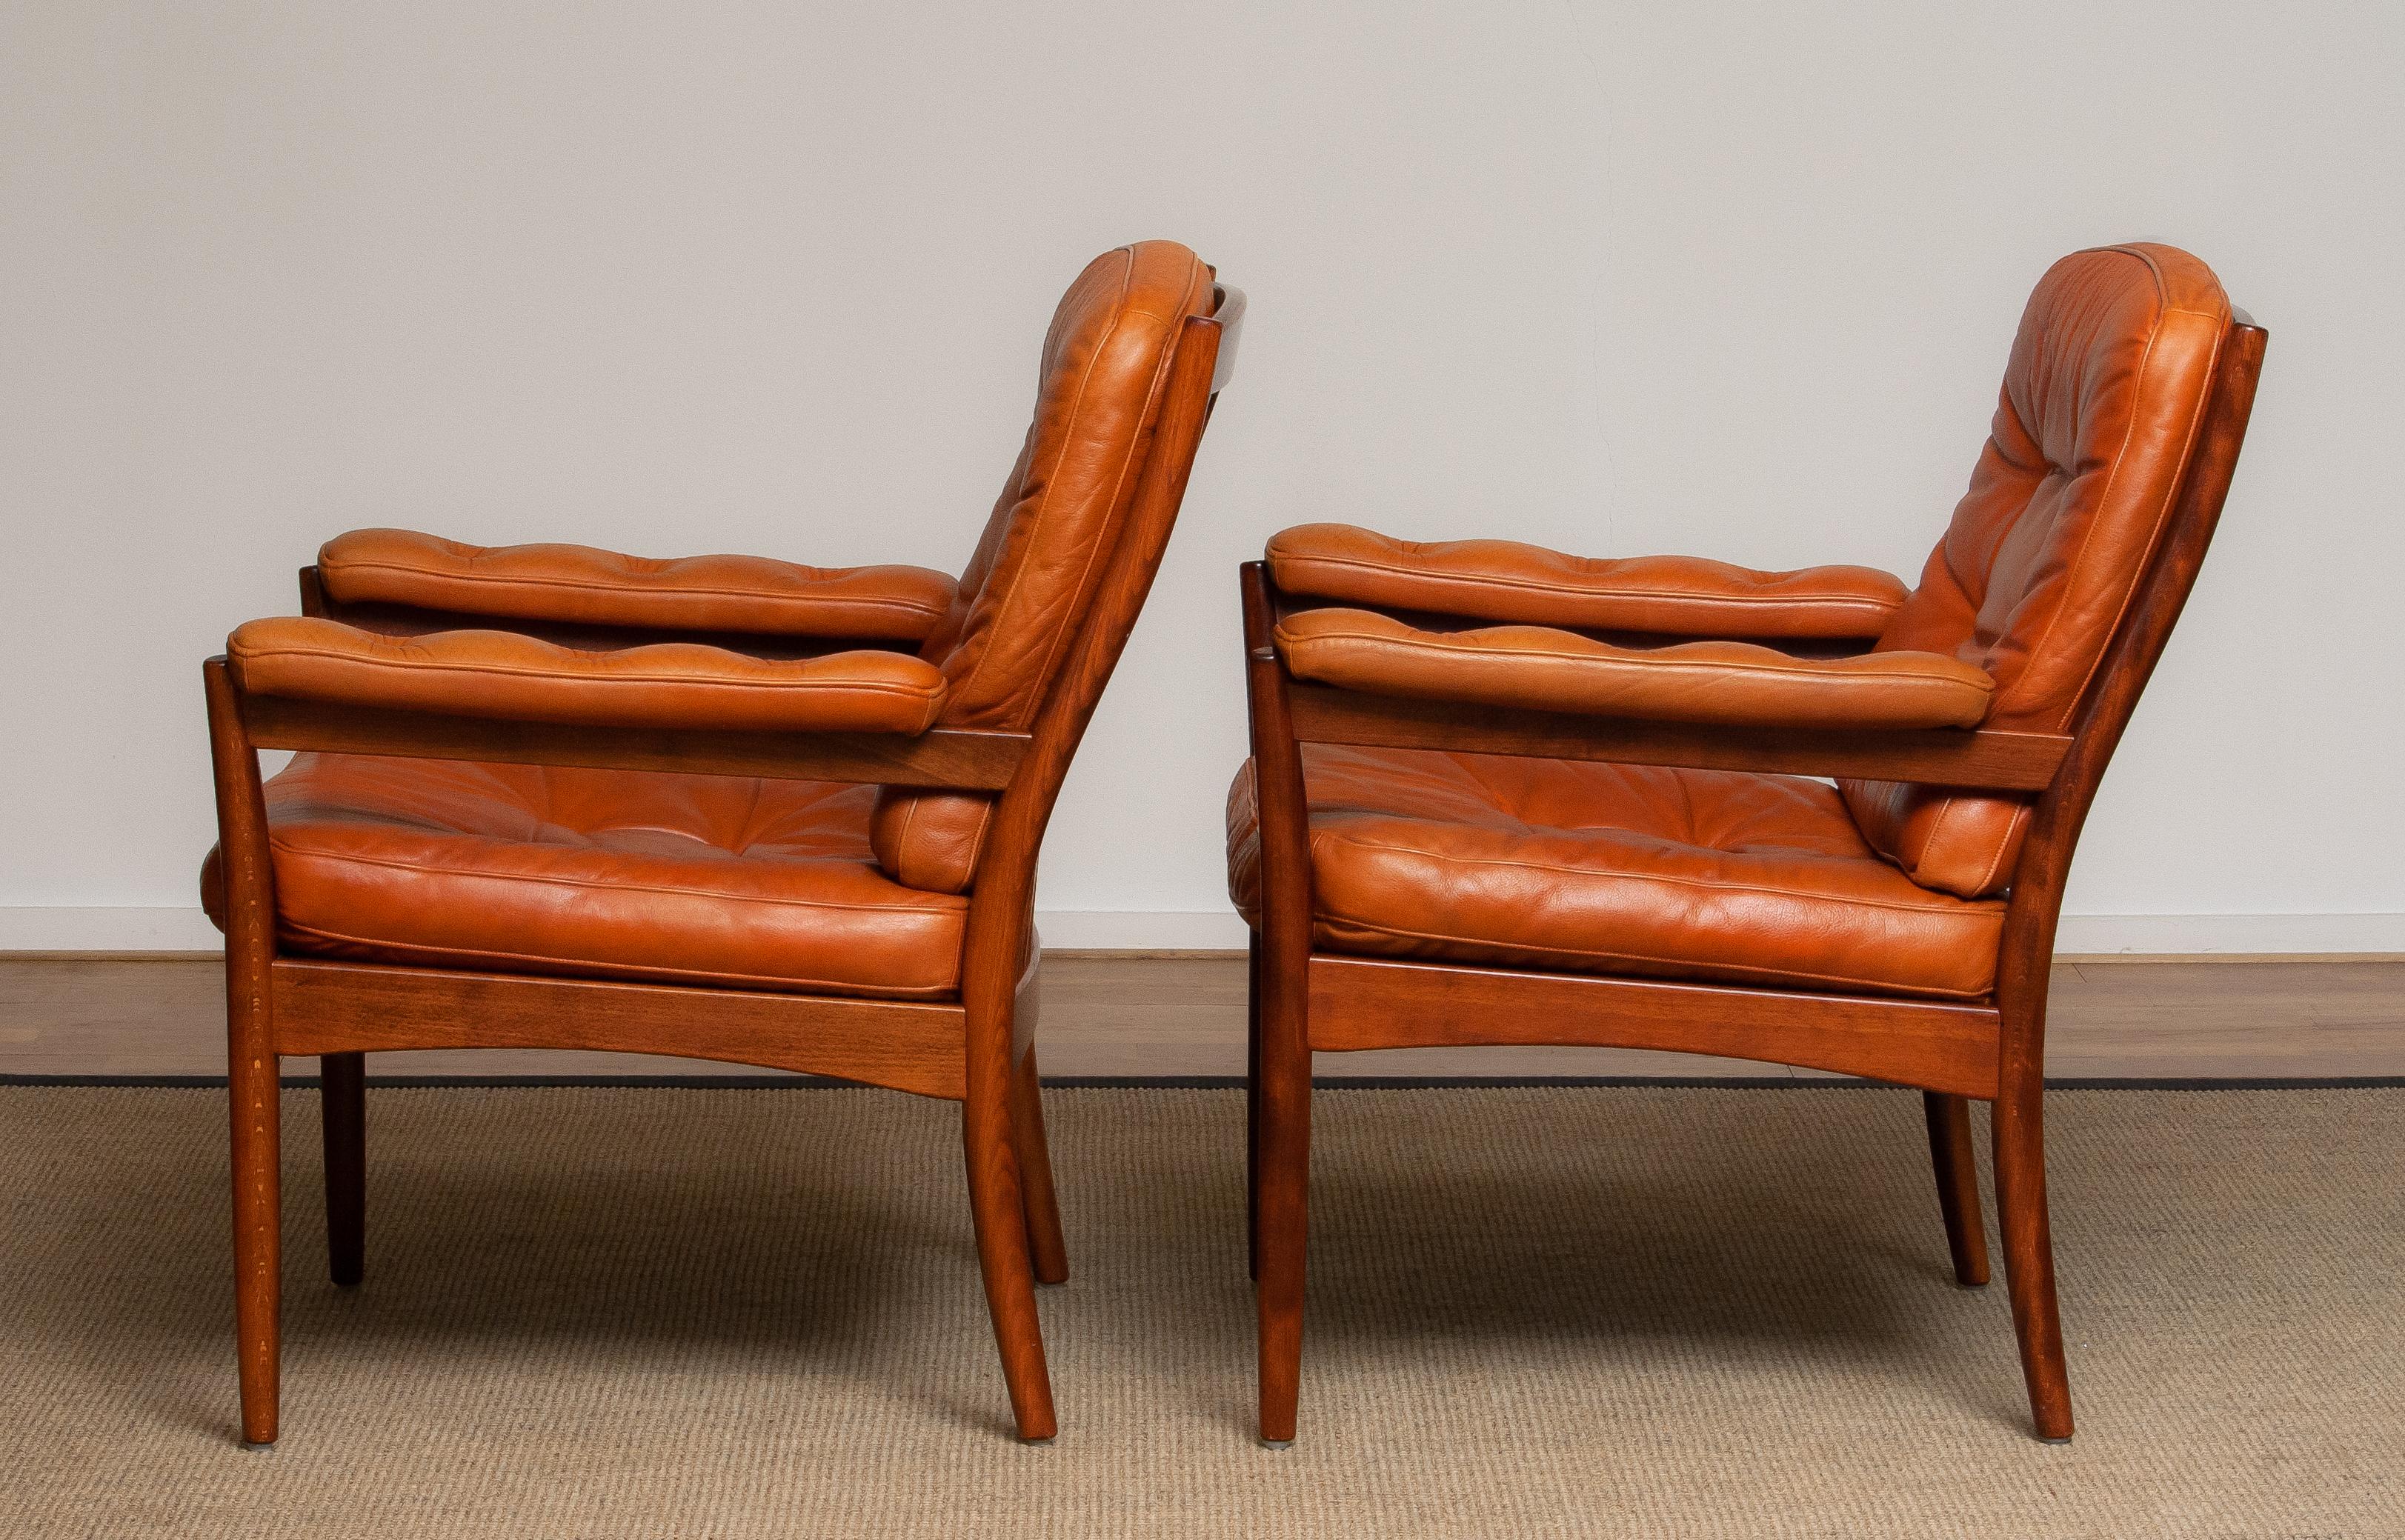 Late 20th Century 1970s Pair of Armchairs in Sturdy Cognac Leather by Göte Möbel Sweden, Carmen